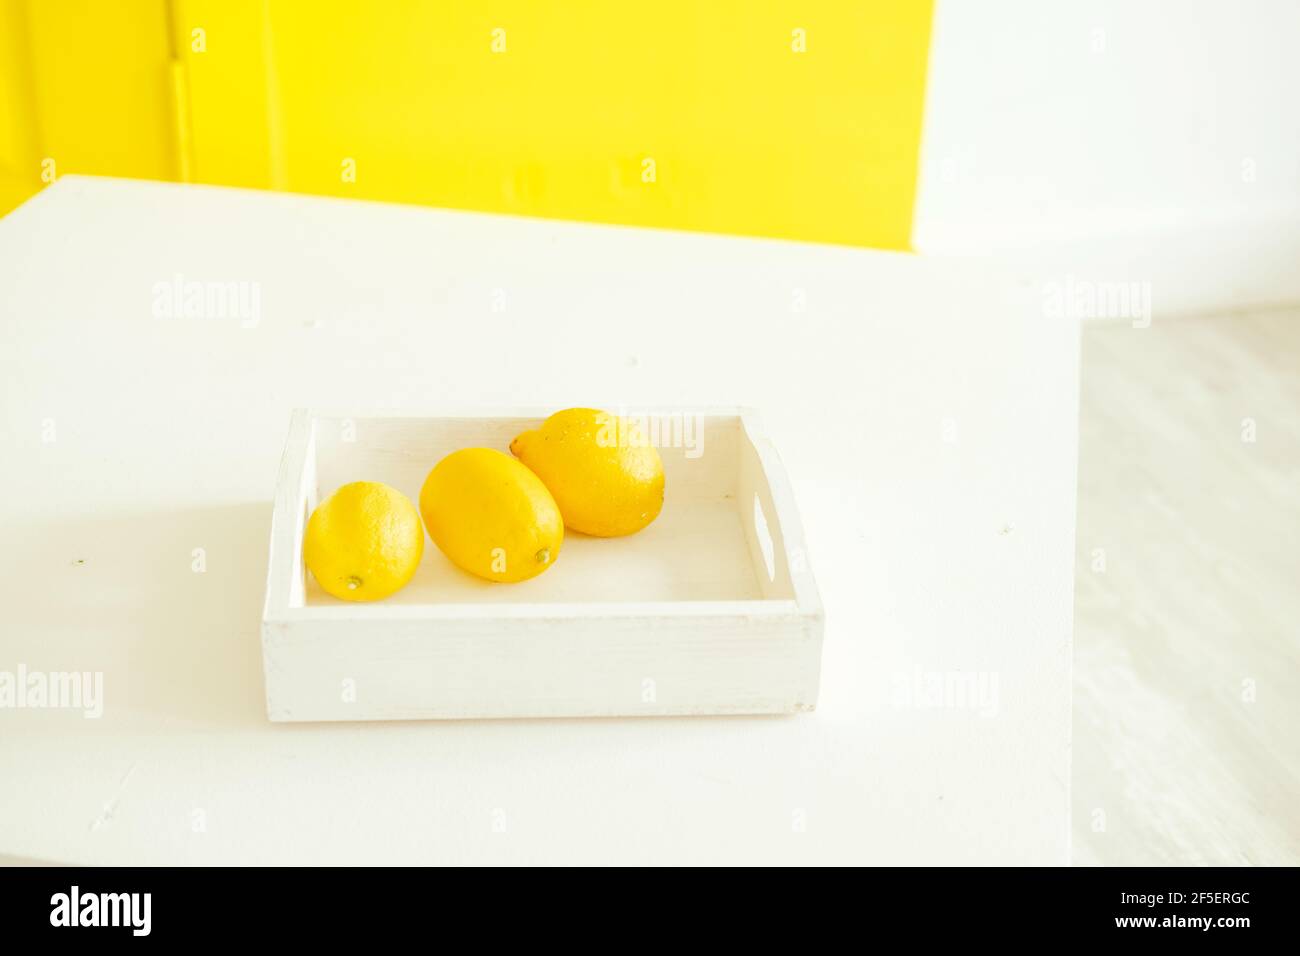 bright yellow lemons on a yellow background. Lemons on a white tray. Contrast photography with the color of the year. Stylish decor. Citrus fruits Stock Photo